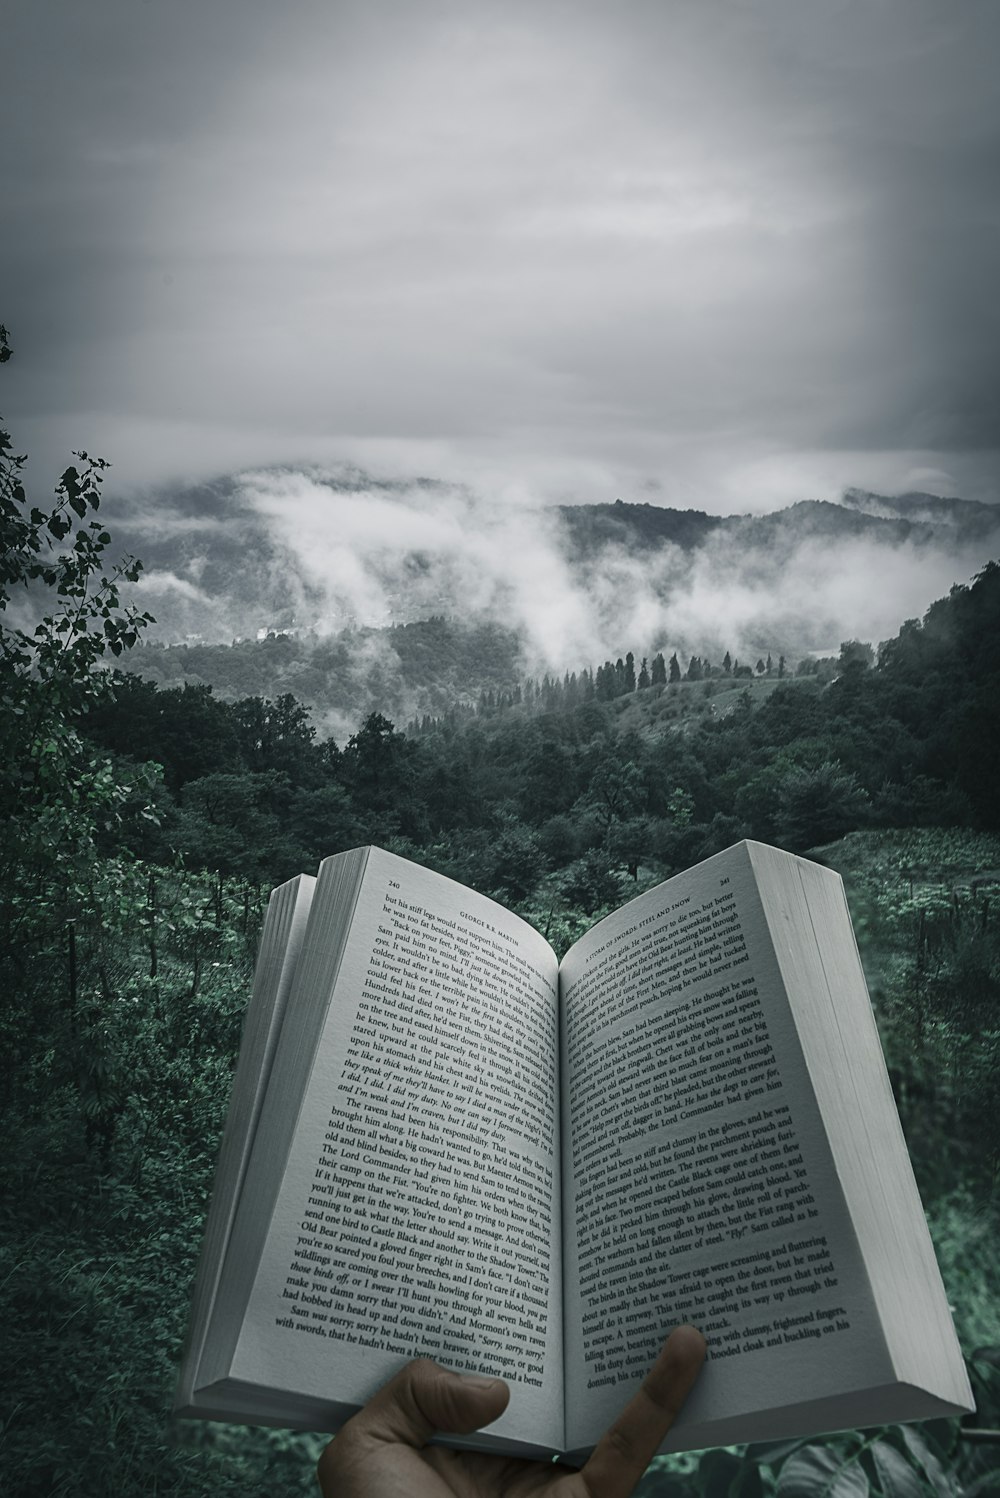 900 Book Images Download Hd Pictures Photos On Unsplash